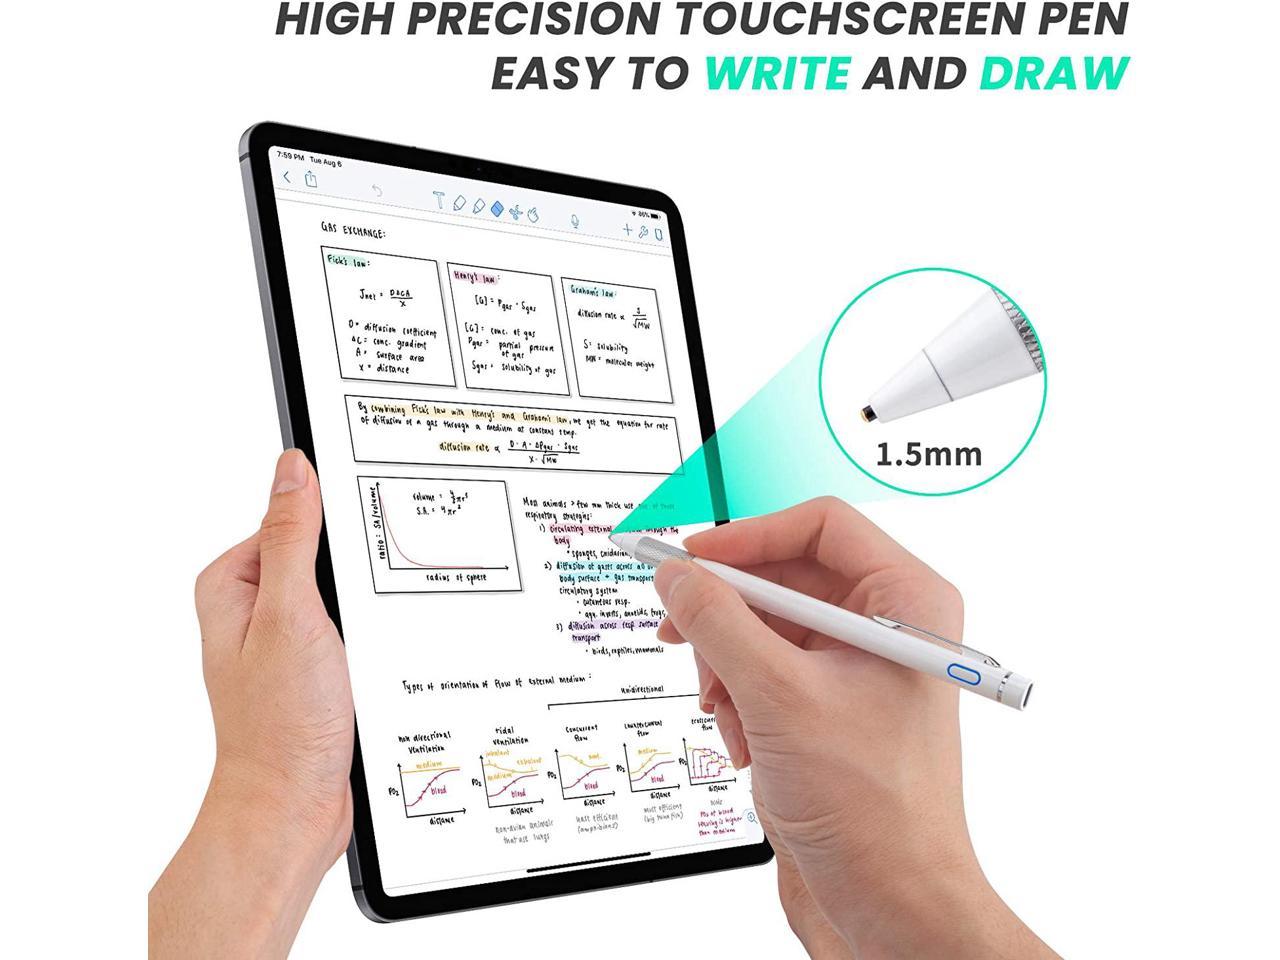 Electronic Stylus Pen for  HD Fire 10 Tablet Pencil High Precision with Ultra Fine Tip,Good at Drawing and Writing,Black Active Digital Capacitive Pen for  Fire HD 10 Tablet 